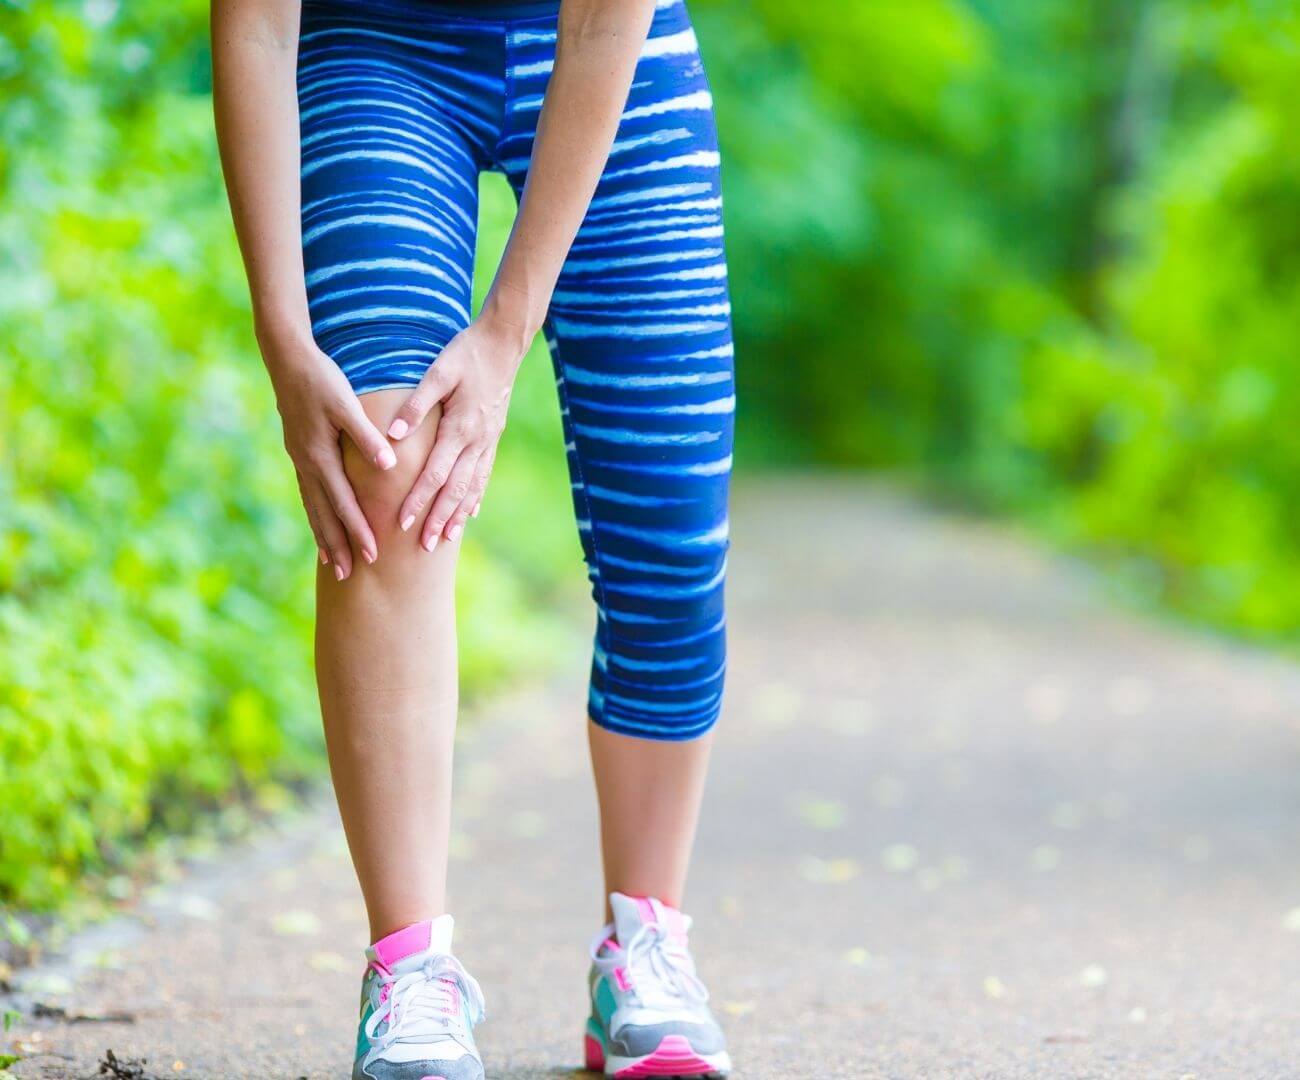 7 Natural Herbs, Vitamins and Minerals for Youthful Knees